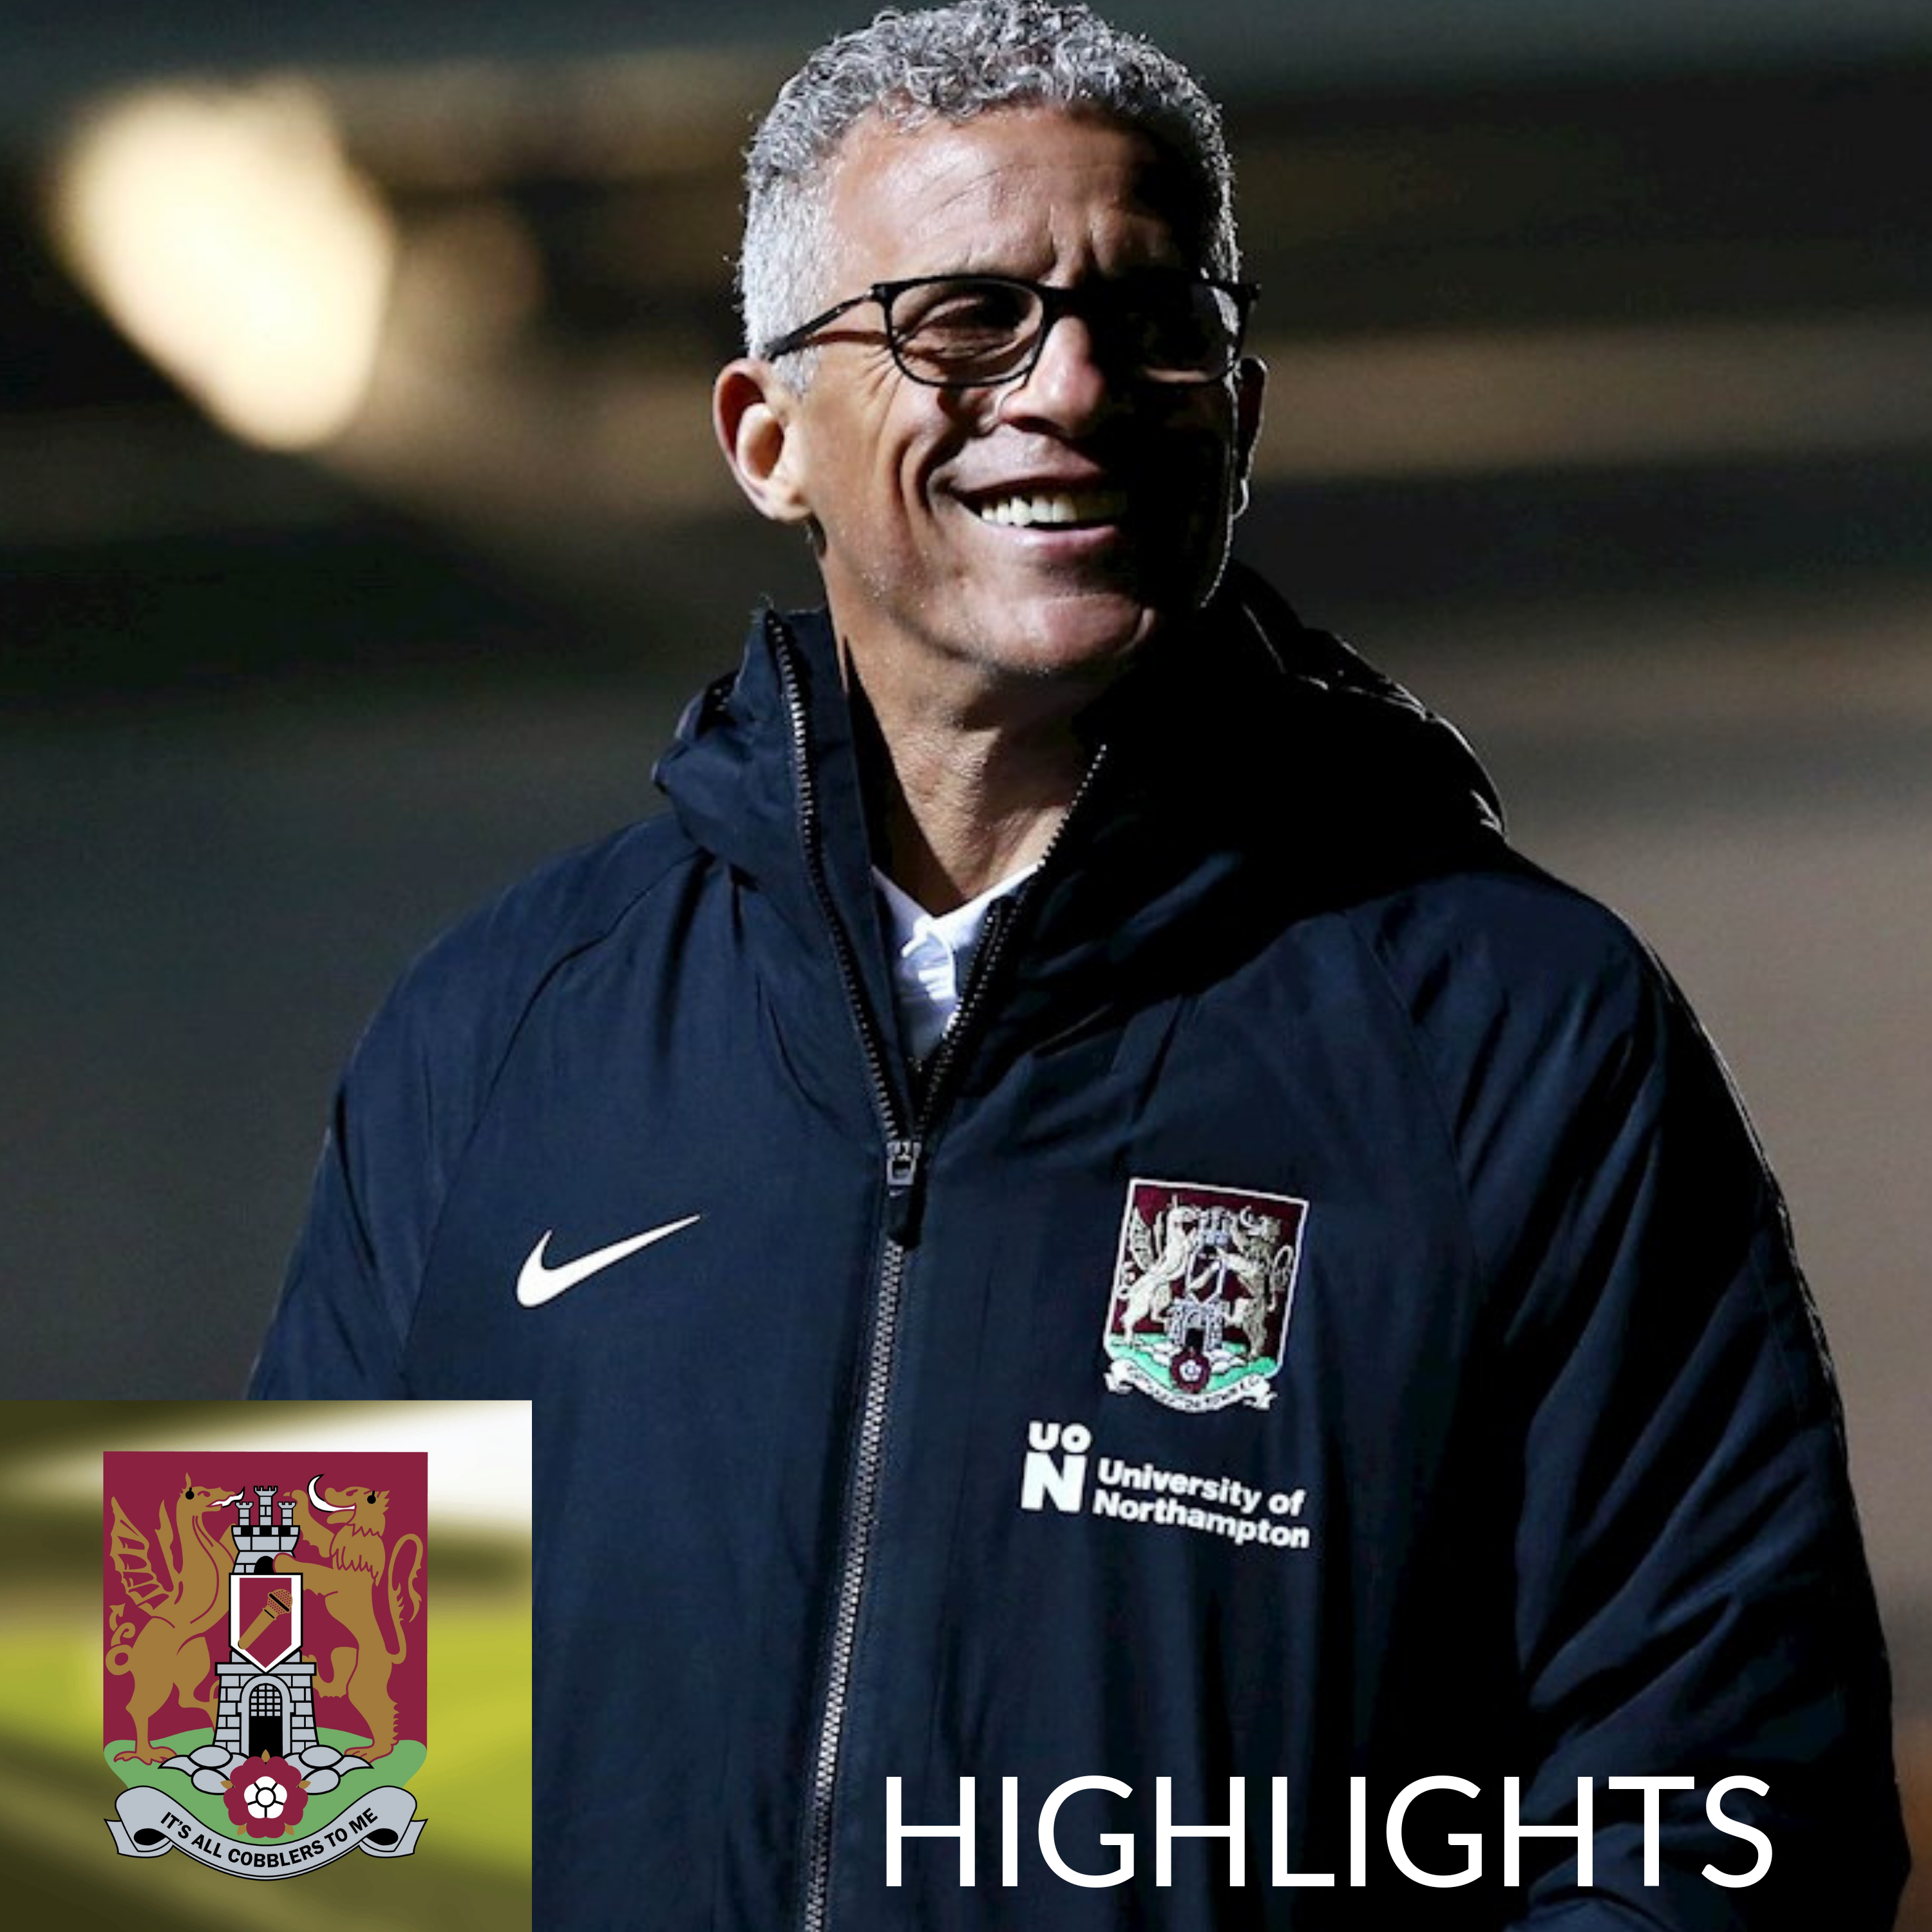 Keith Curle in Northampton tracksuit. Cobblers To Me logo bottom left and the word Highlights written in the bottom right.